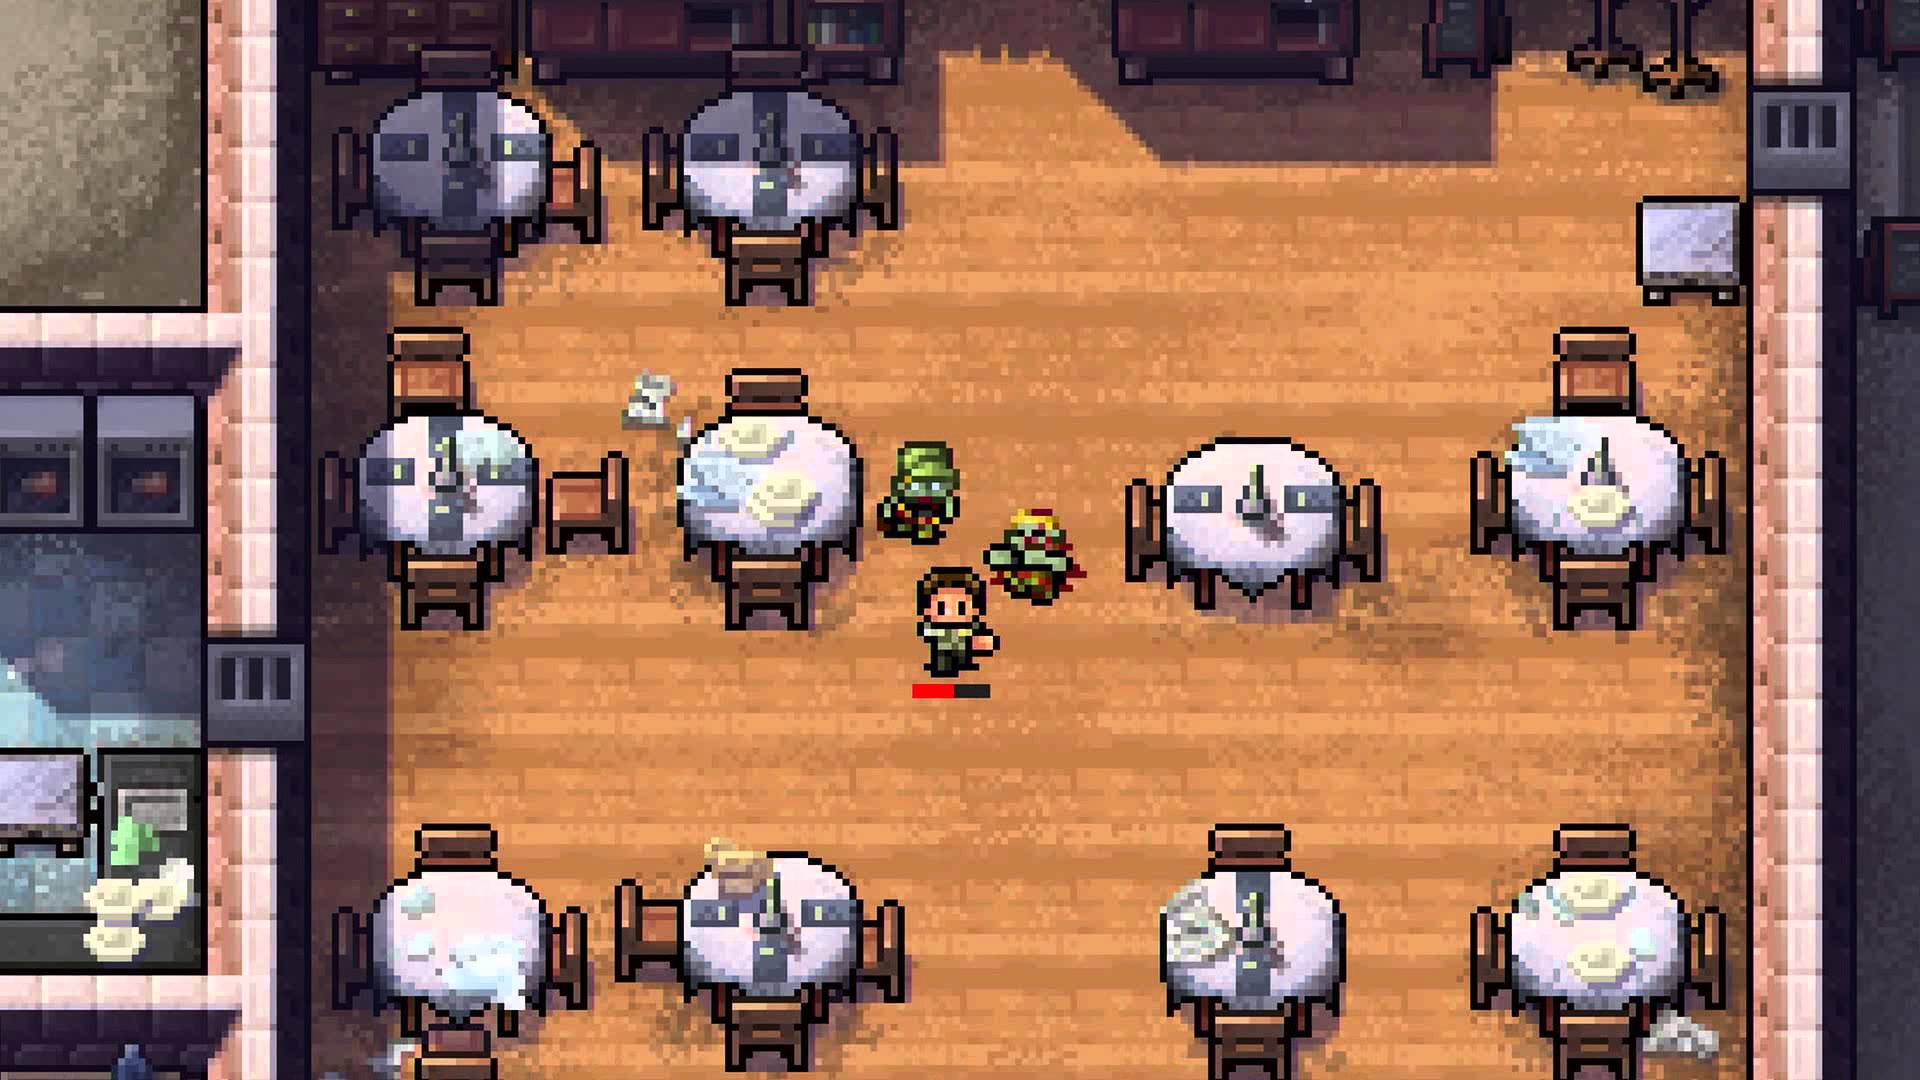 escapists the walking dead crafting guide